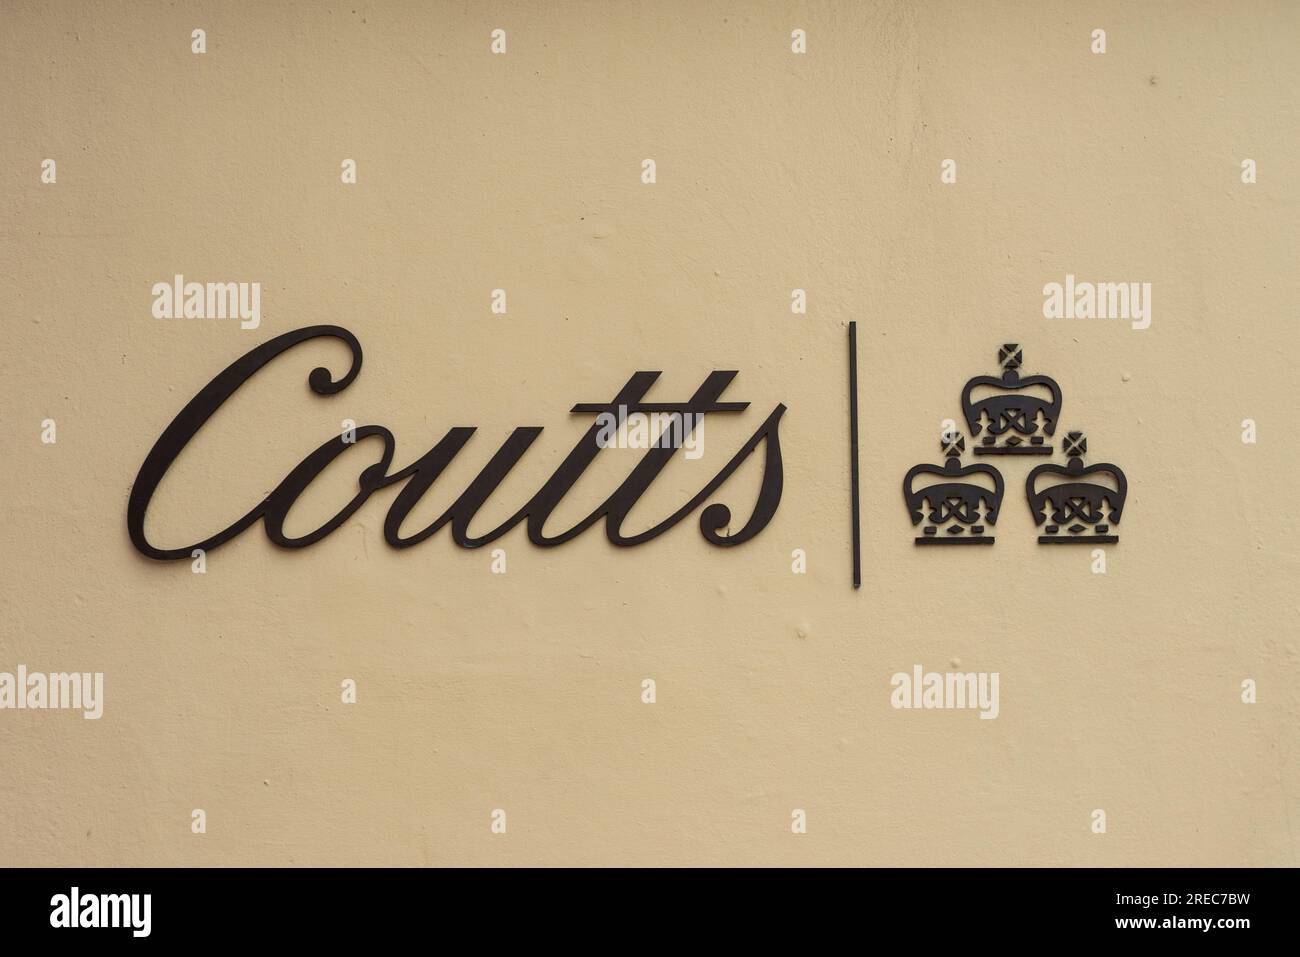 Coutts Private Bank and Wealth Manager, Londres, Royaume-Uni Banque D'Images